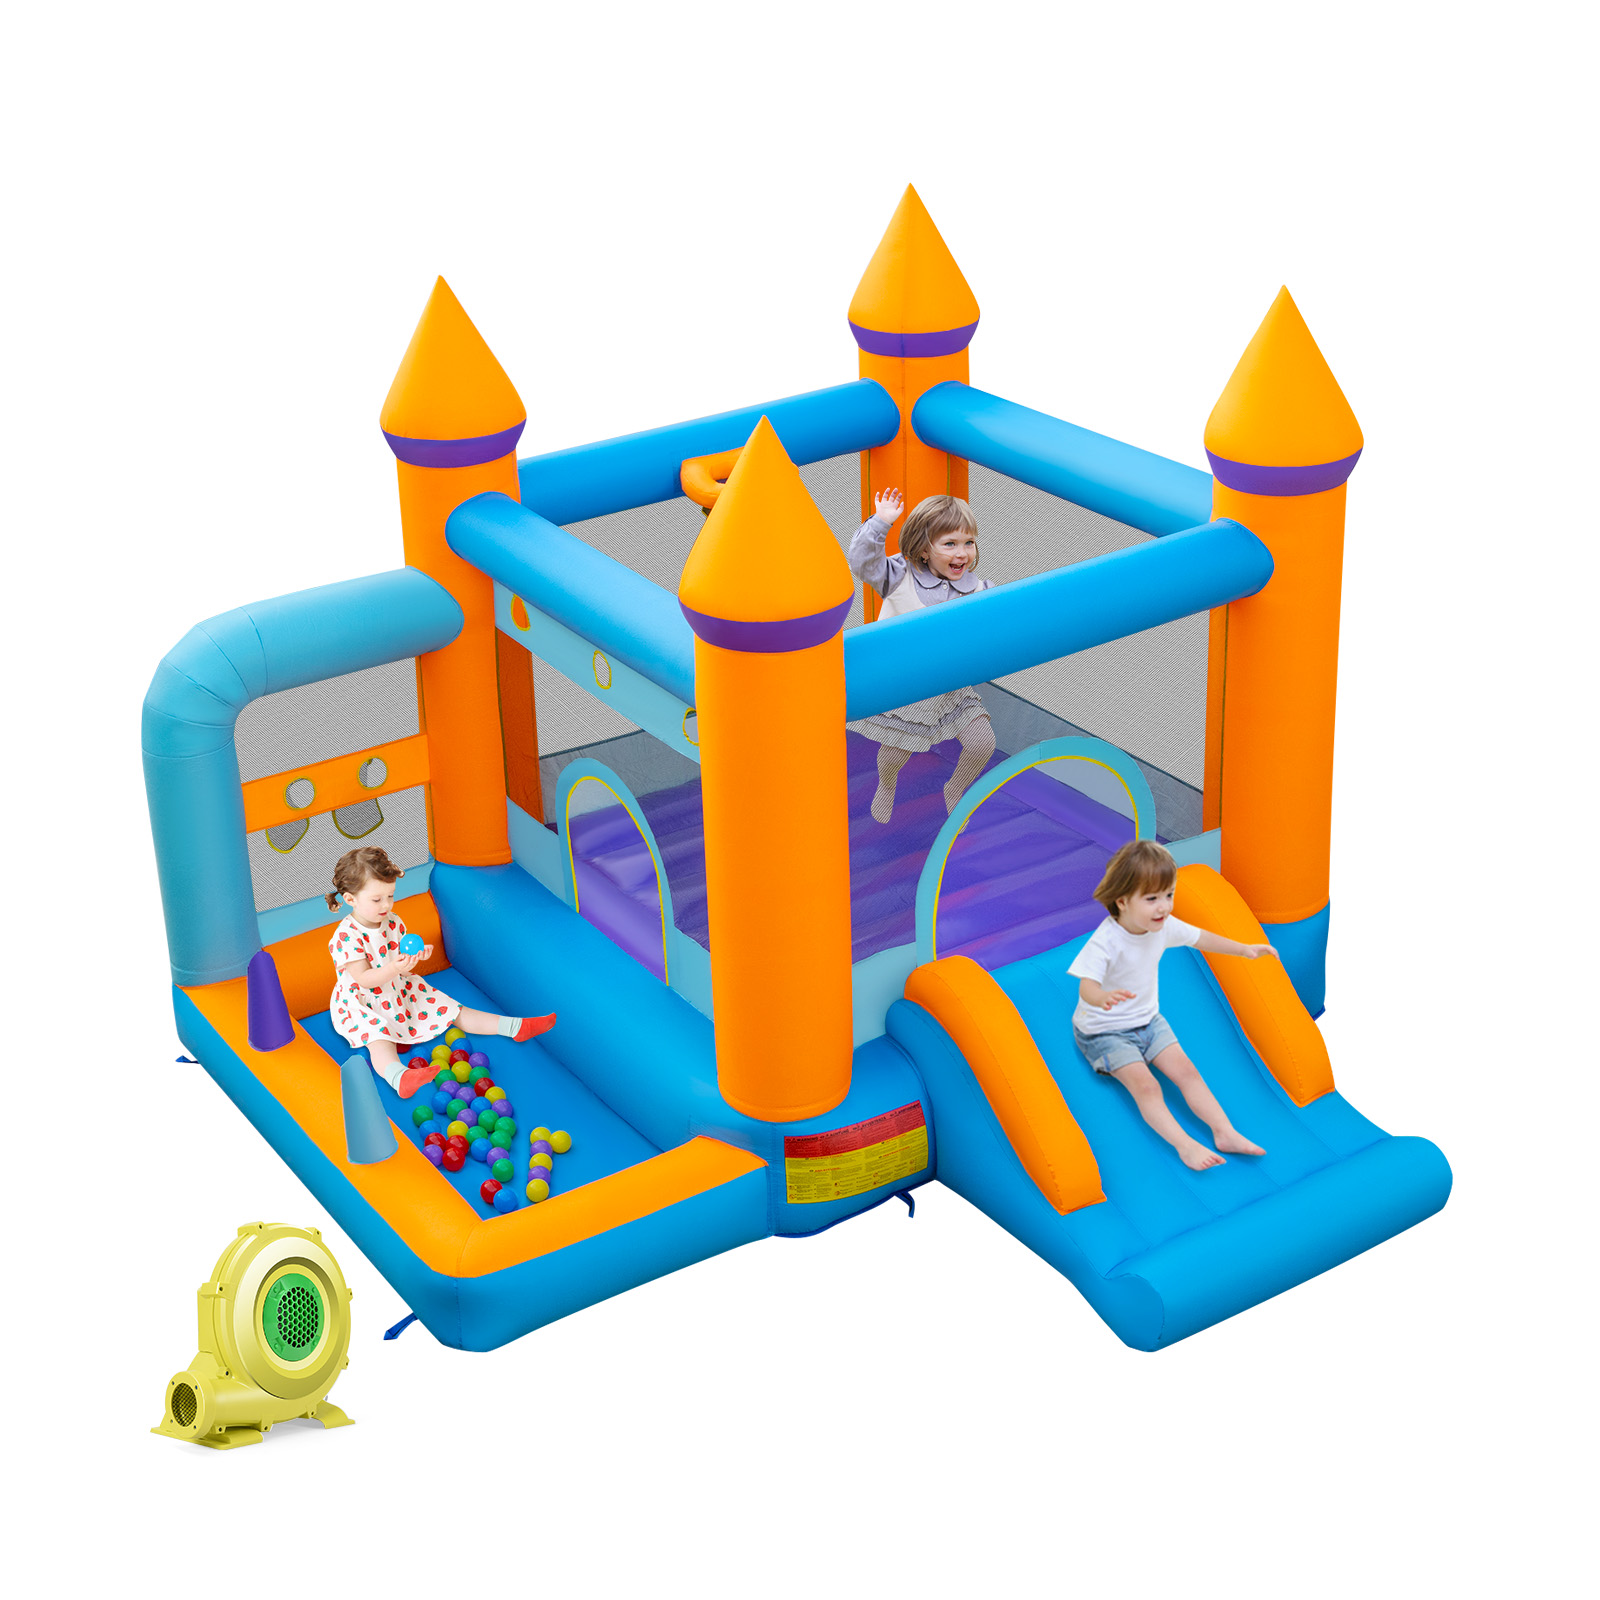 Jumping Air Bounce Castle for Kids with Ocean Ball Pool and 680W Blower